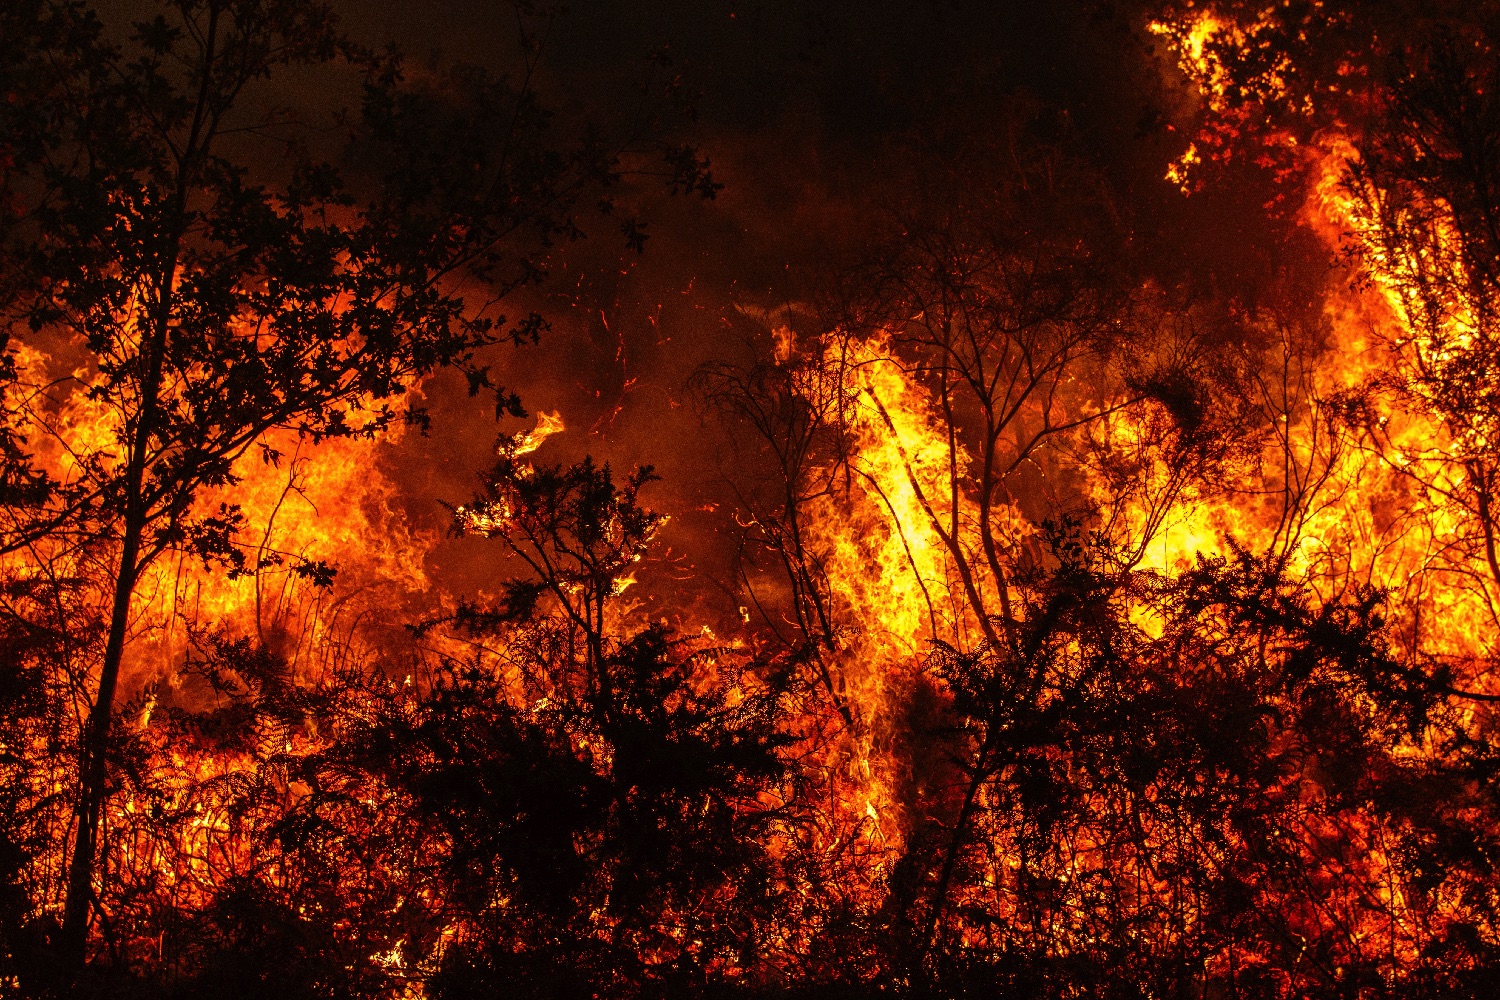 A.I. Cameras Help Stomp Wildfires Before They Become a Major Problem ...